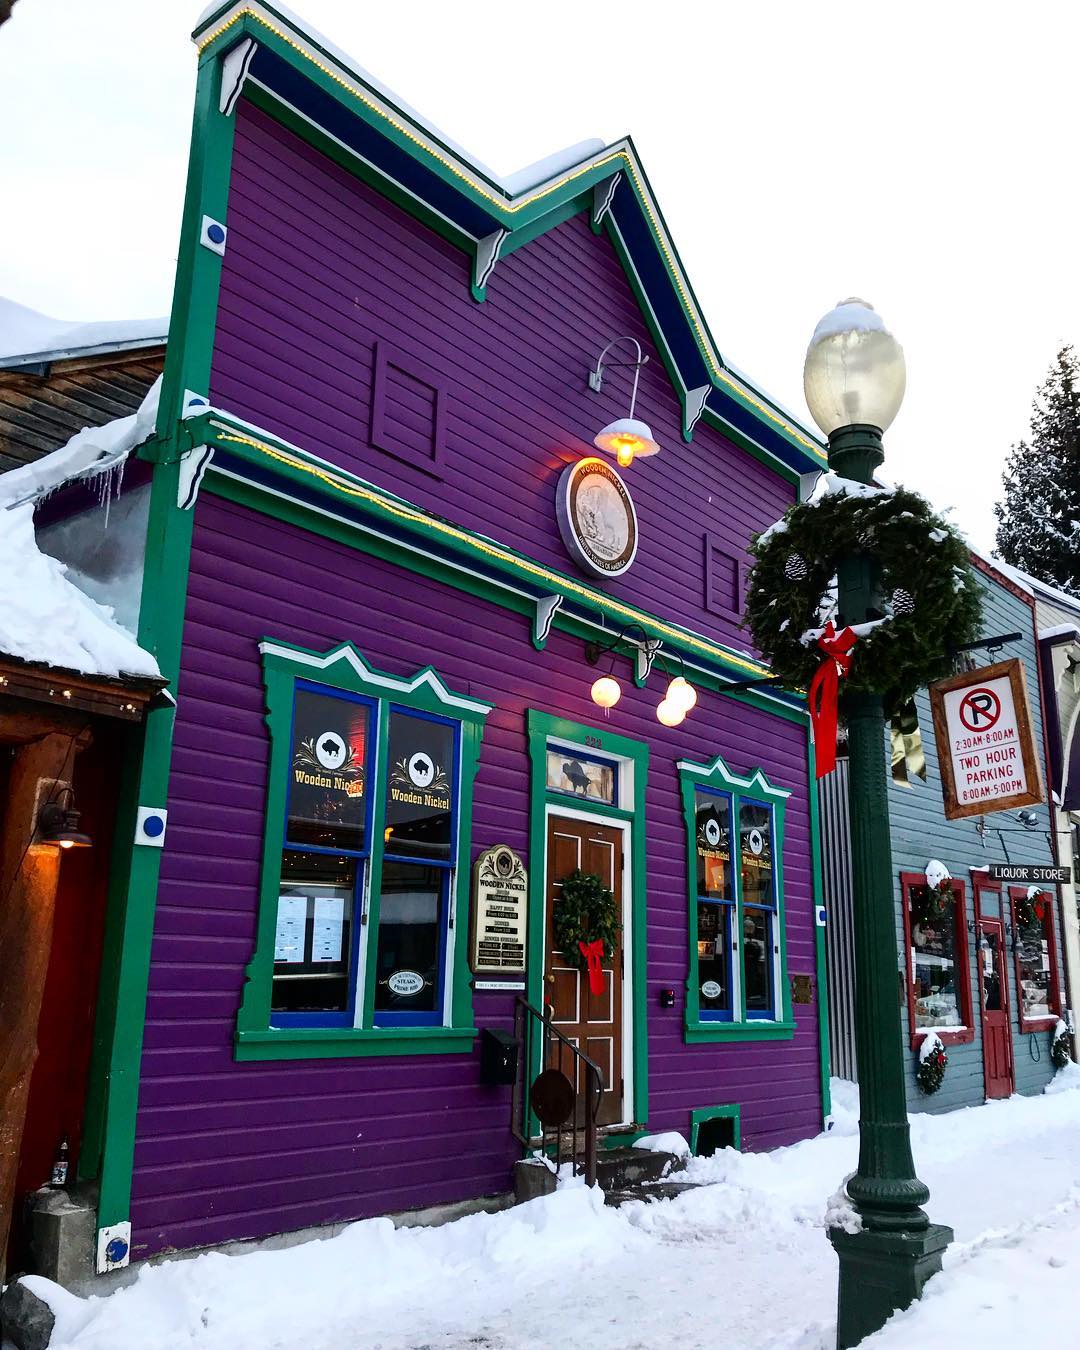 The Wooden Nickel Steakhouse - Crested Butte, CO